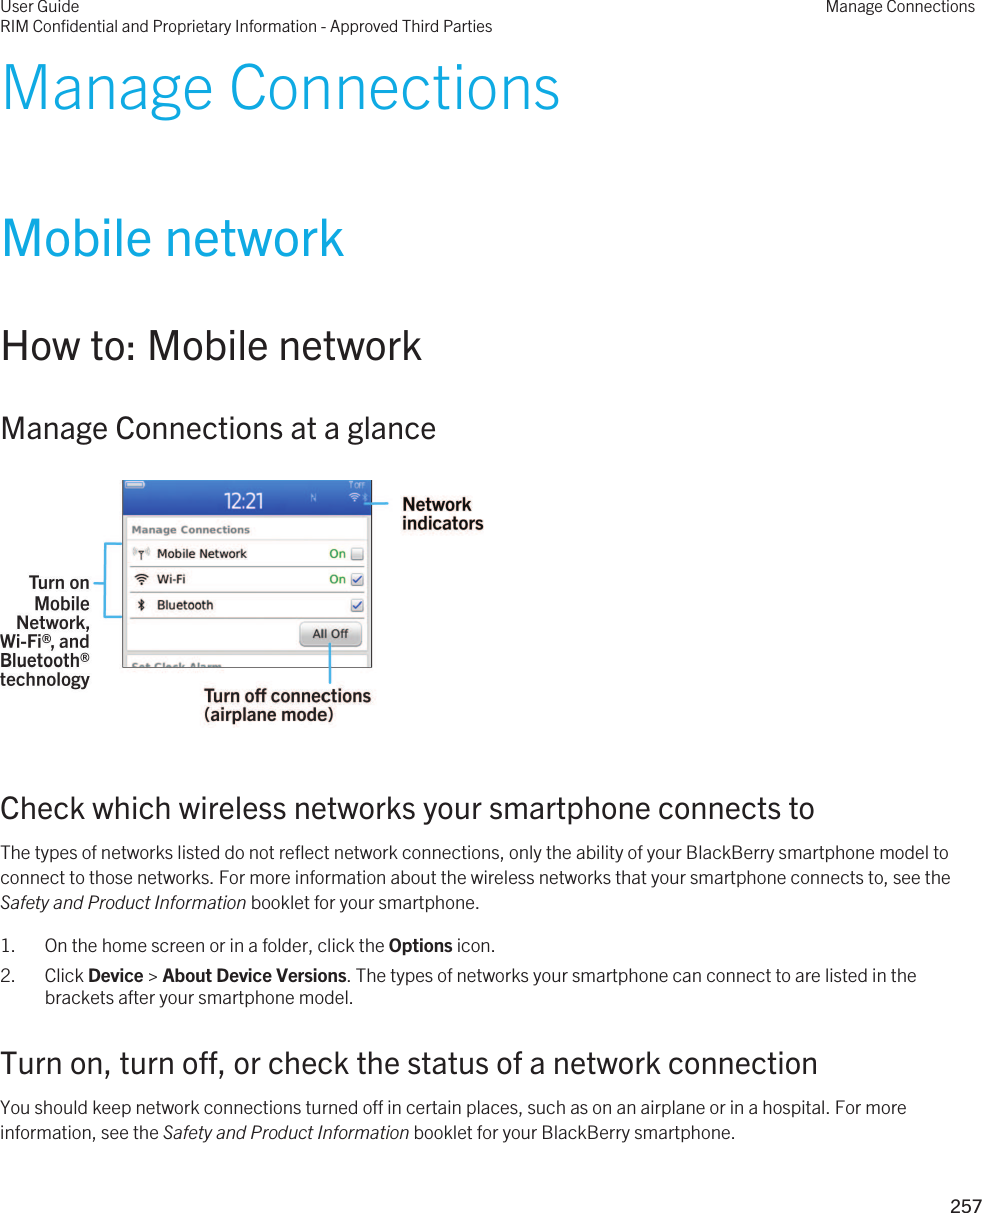 Manage ConnectionsMobile networkHow to: Mobile networkManage Connections at a glance  Check which wireless networks your smartphone connects toThe types of networks listed do not reflect network connections, only the ability of your BlackBerry smartphone model to connect to those networks. For more information about the wireless networks that your smartphone connects to, see the Safety and Product Information booklet for your smartphone.1. On the home screen or in a folder, click the Options icon.2. Click Device &gt; About Device Versions. The types of networks your smartphone can connect to are listed in the brackets after your smartphone model.Turn on, turn off, or check the status of a network connectionYou should keep network connections turned off in certain places, such as on an airplane or in a hospital. For more information, see the Safety and Product Information booklet for your BlackBerry smartphone.User GuideRIM Confidential and Proprietary Information - Approved Third PartiesManage Connections257 